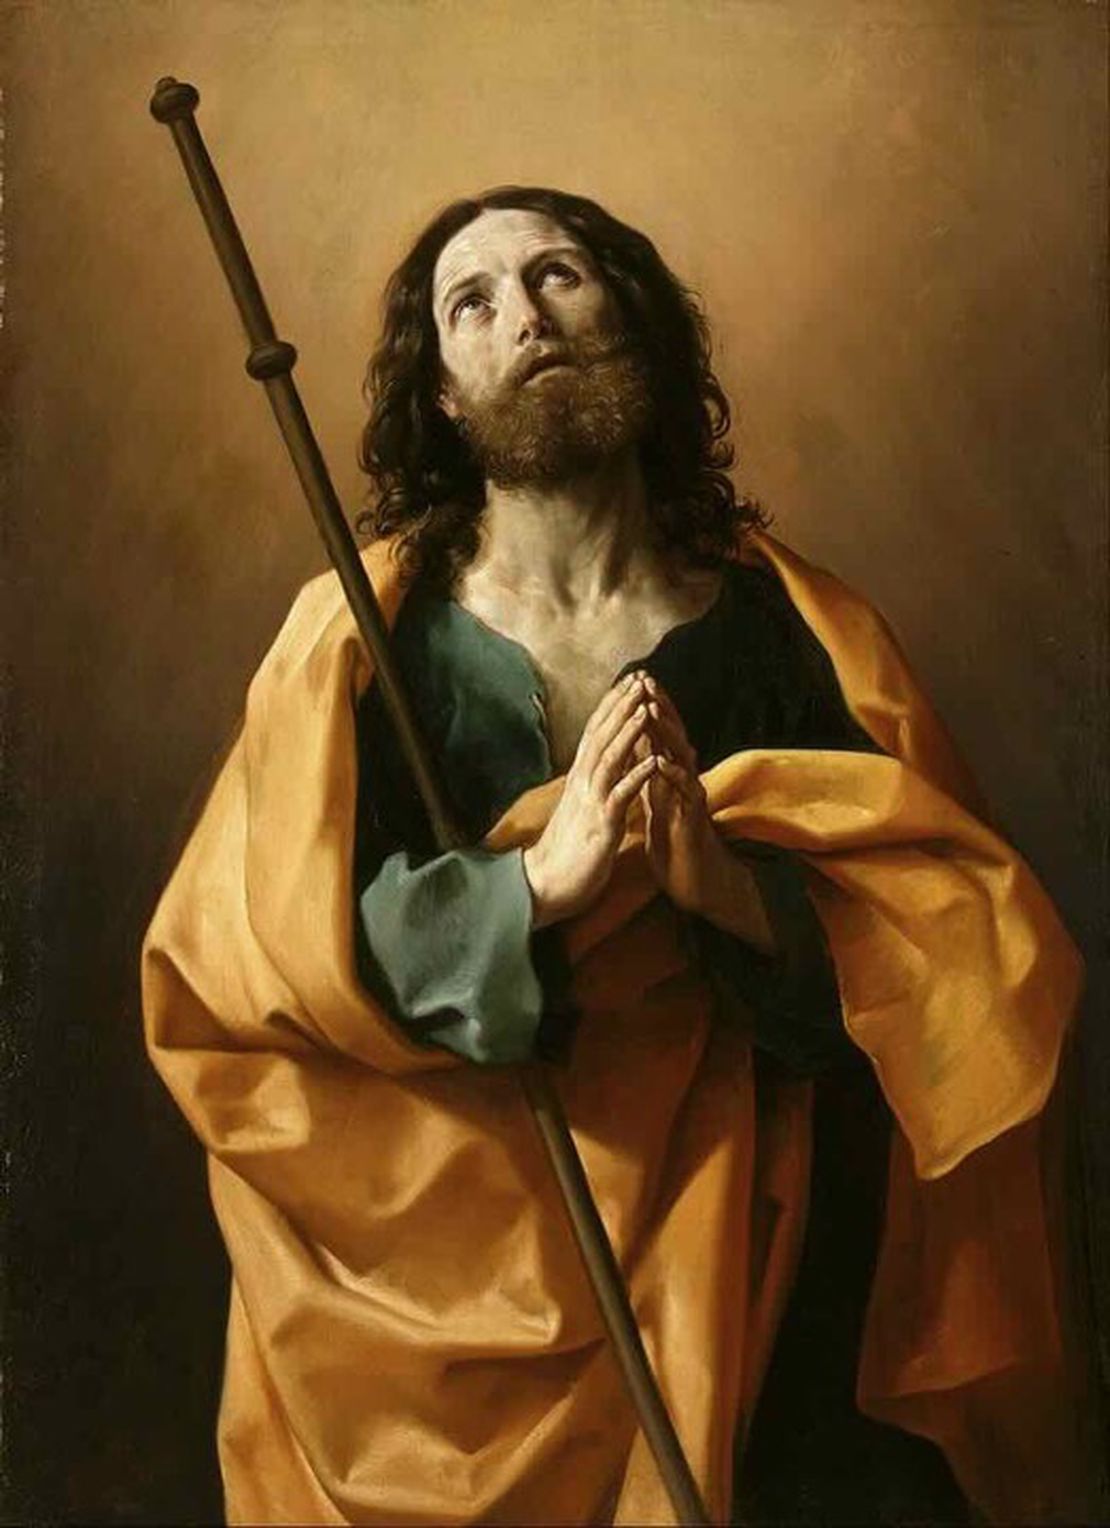 Feast day of St. James